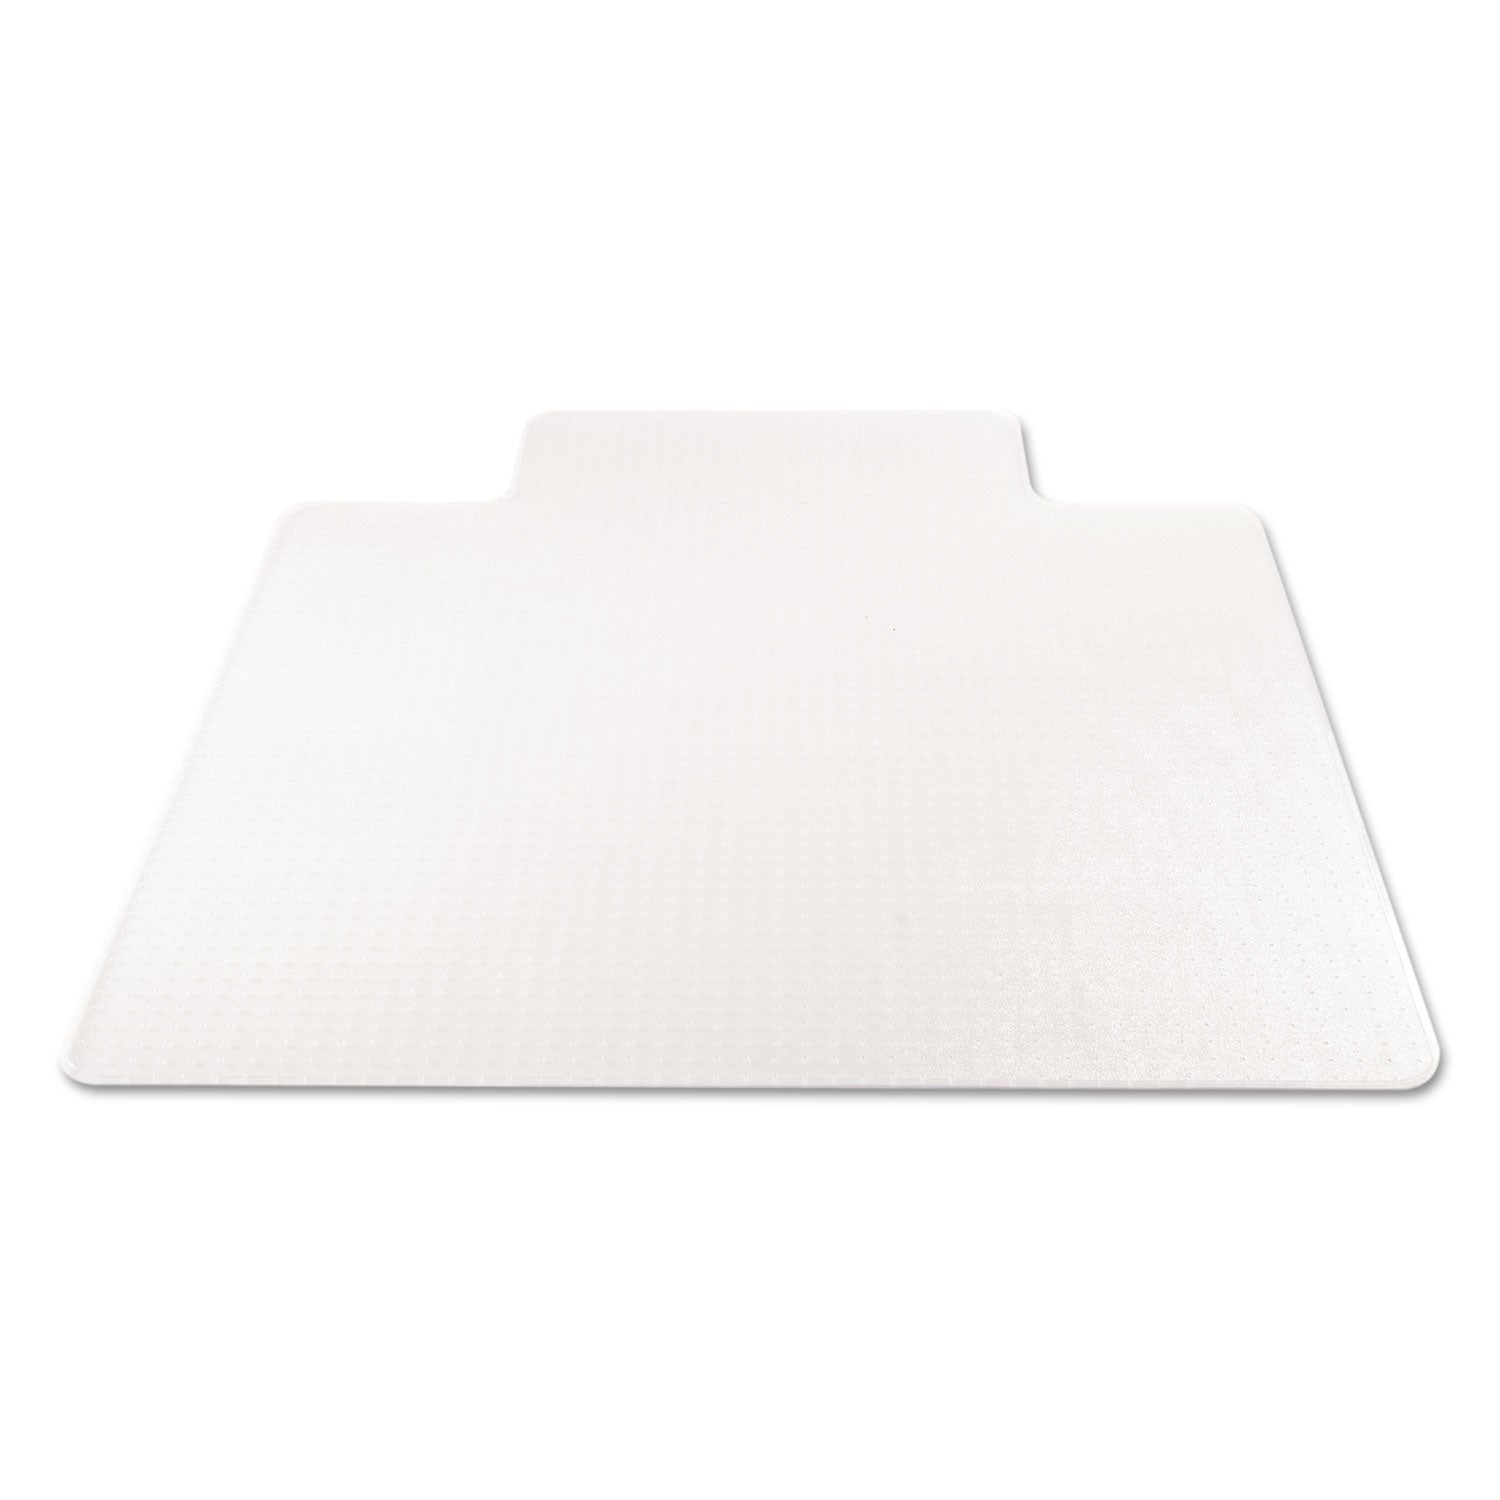 SuperMat Frequent Use Chair Mat for Medium Pile Carpet, 45 x 53, Wide Lipped, Clear - 